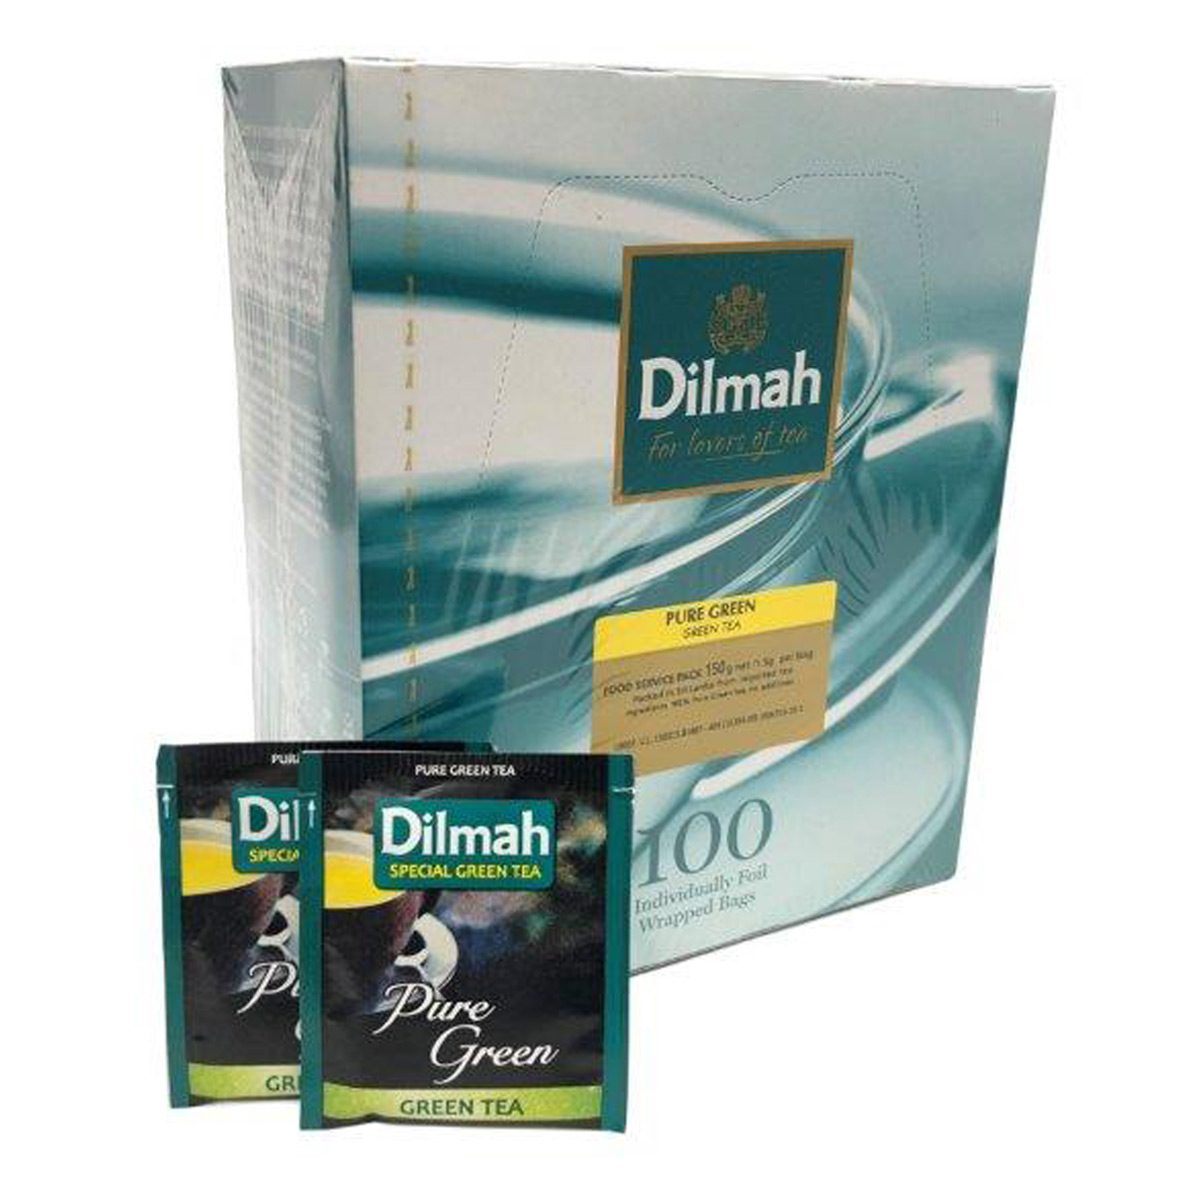 consumables-hospitality-beverage-food-dilmah-pure-green-enveloped-teabags-100pk-pure-ceylon-no--flavouring-only-natural-ingredients-pure-office-cafe-functions-events-vjs-distributors-80923012